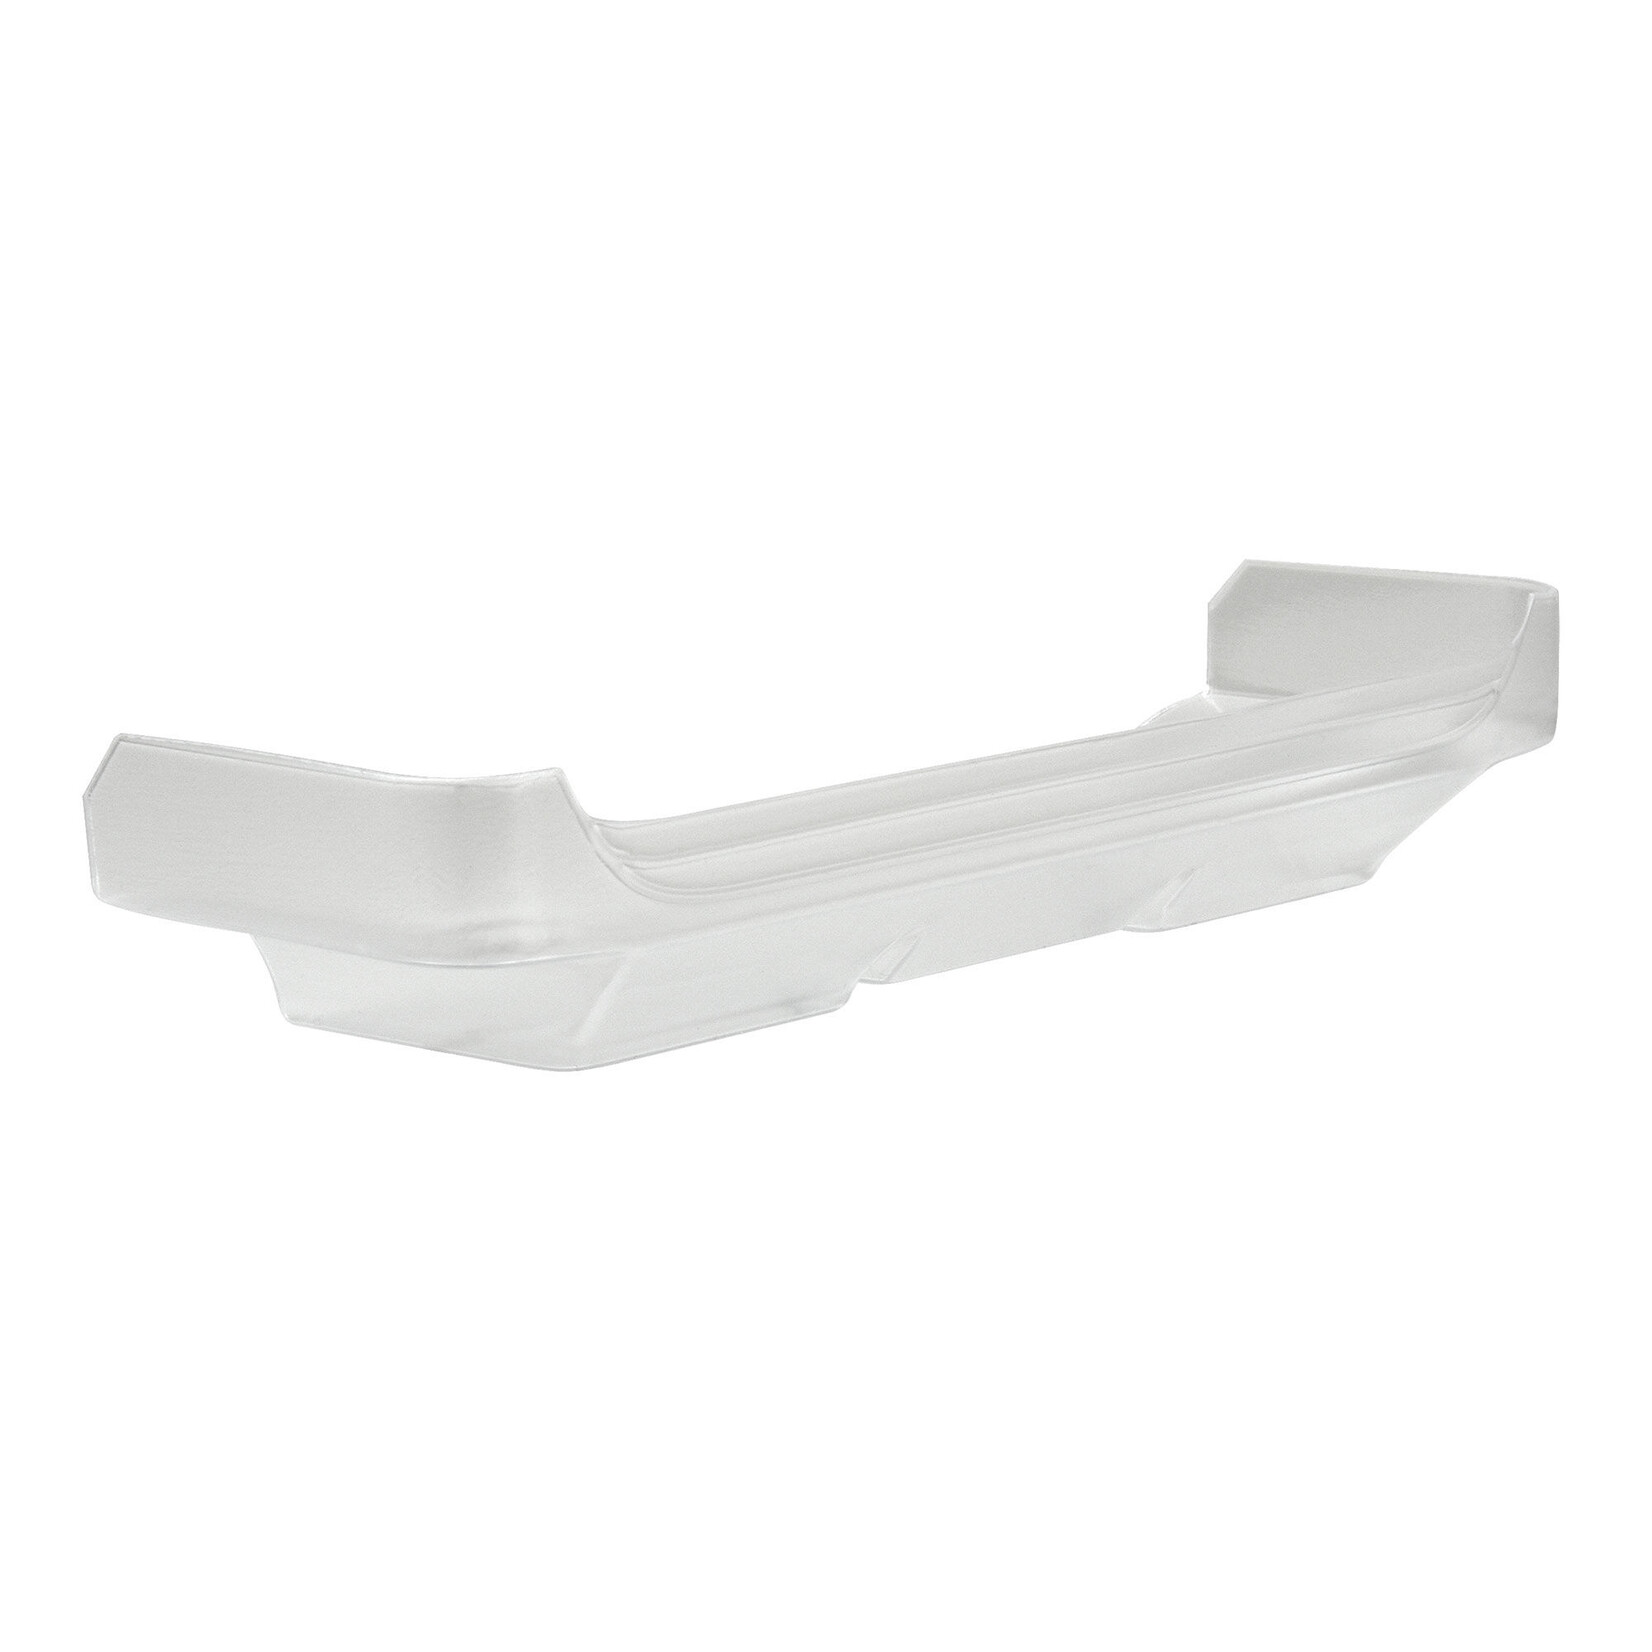 Pro-Line Pre-Cut Air Force 7" Clear Rear Wing (2) for 1:10 Buggy